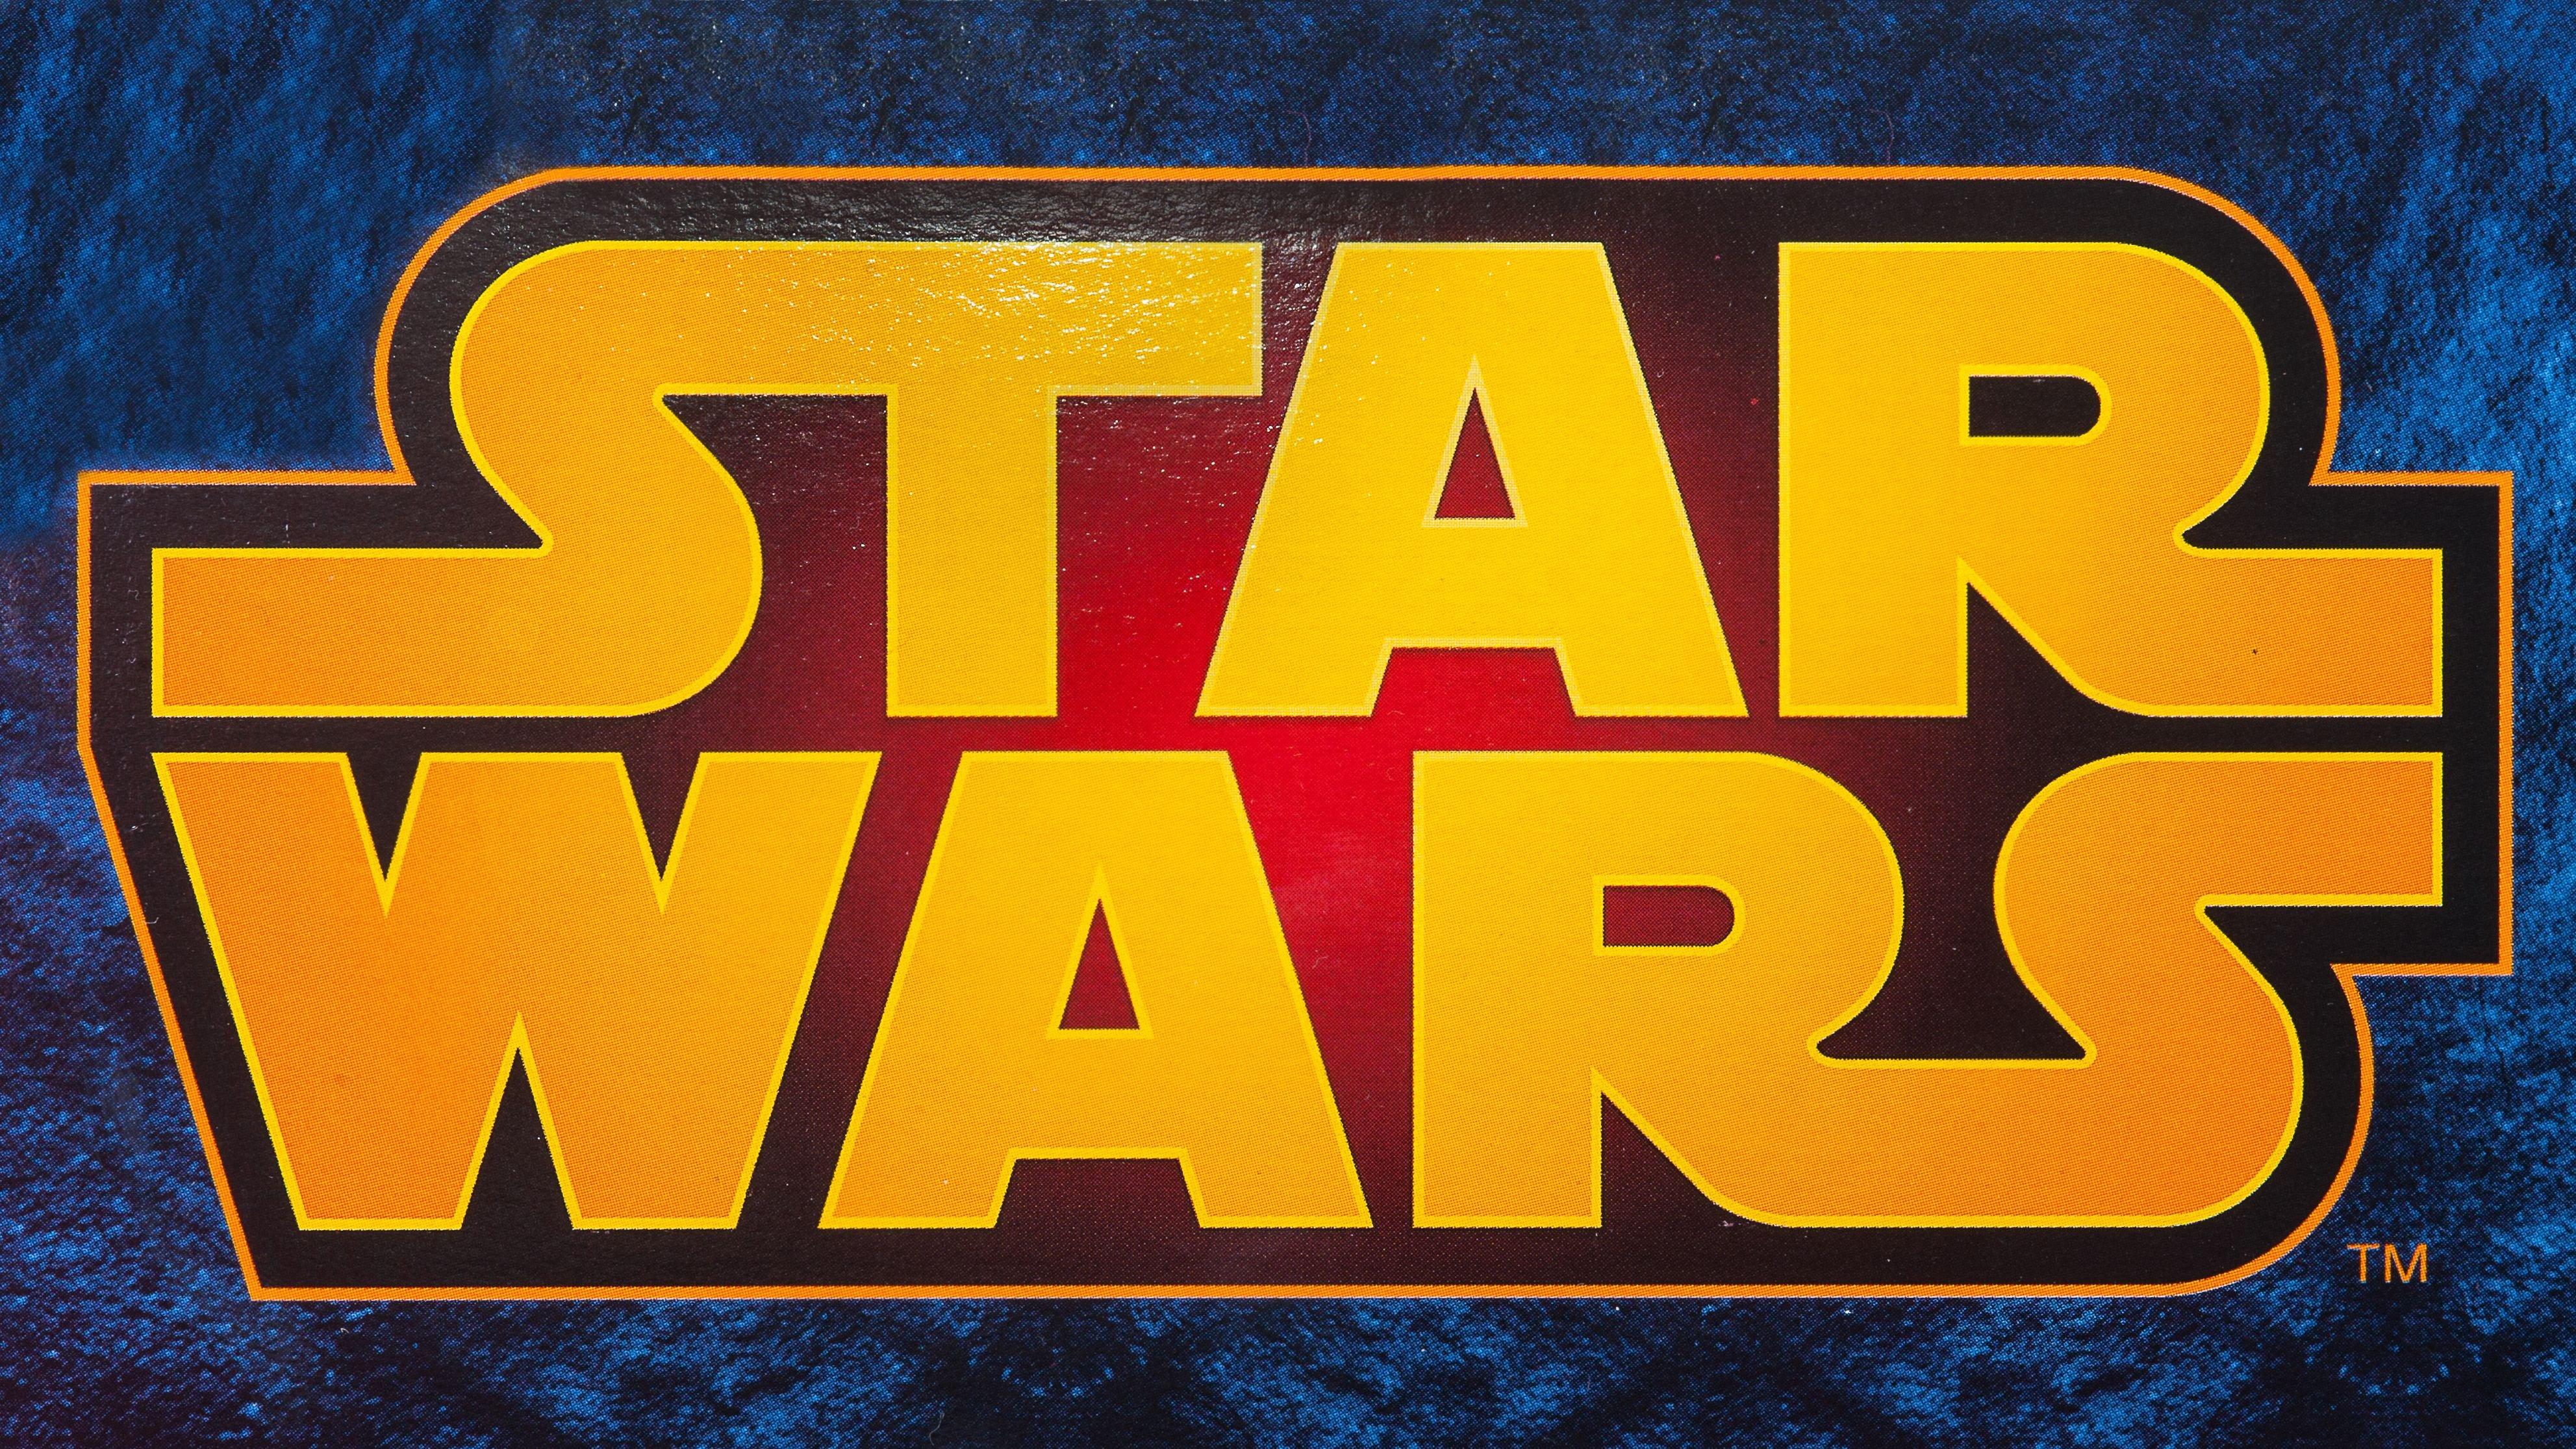 Generic picture of Star Wars logo 